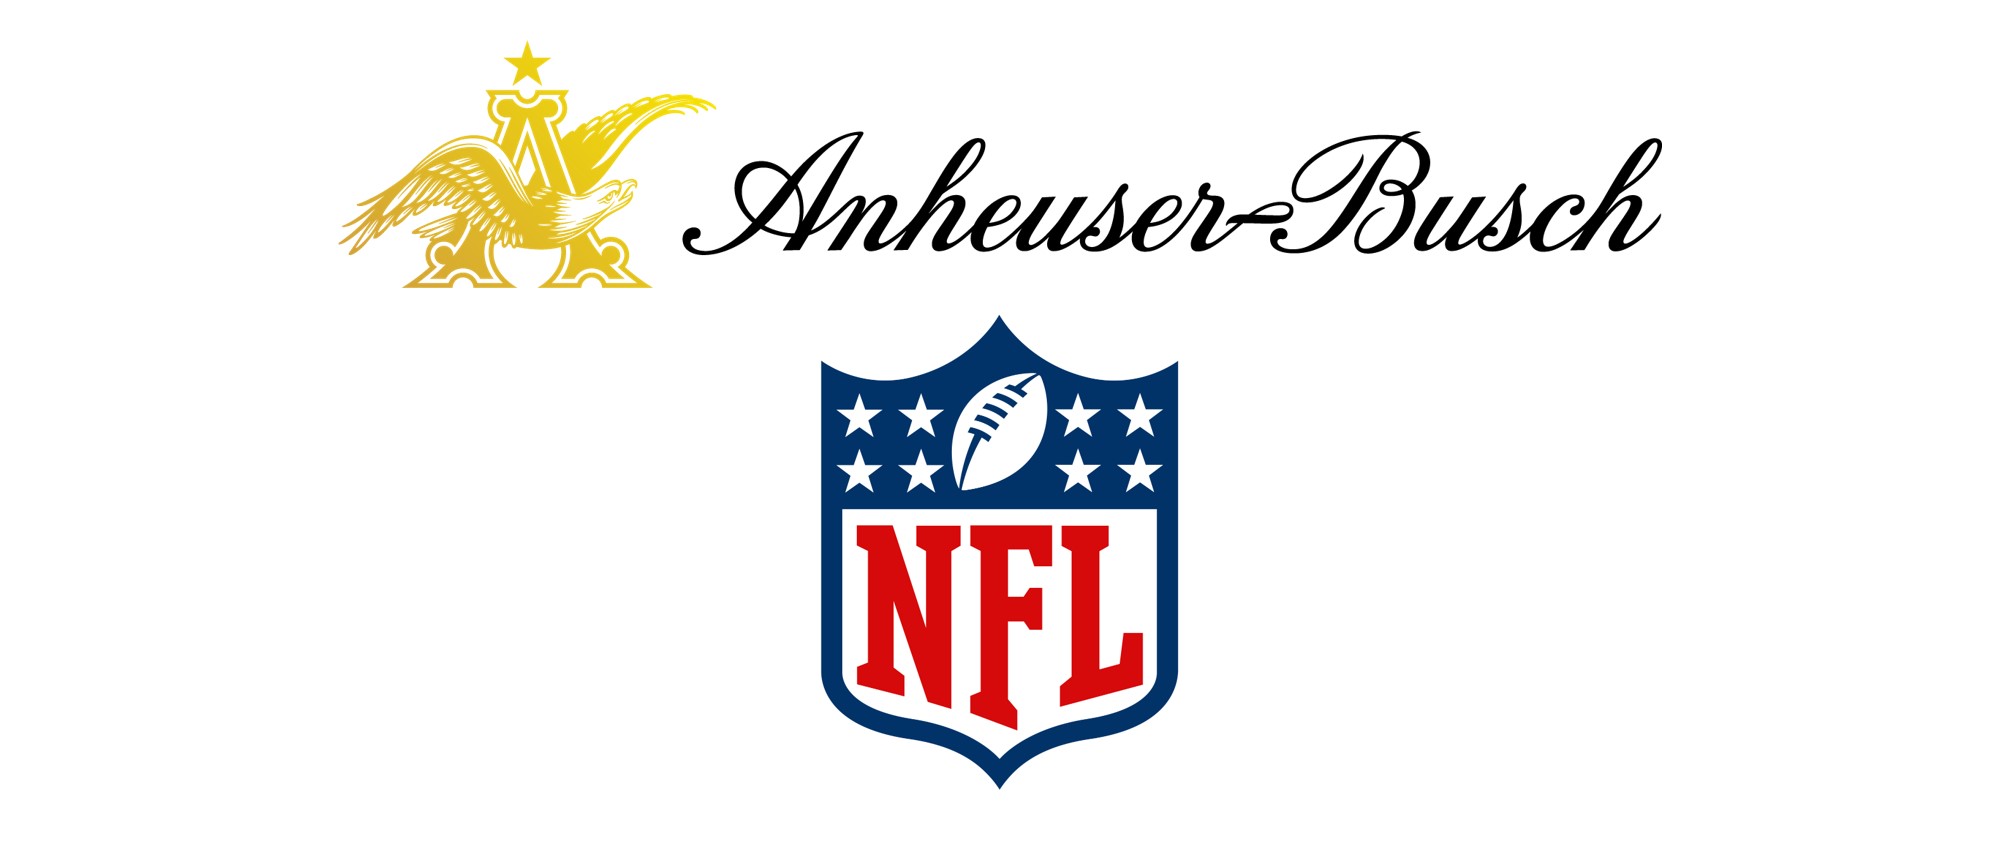 Starting with the NFL Draft, Anheuser-Busch’s New Multi-Year Deal with the NFL Brings Fans Closer to the Game They Love